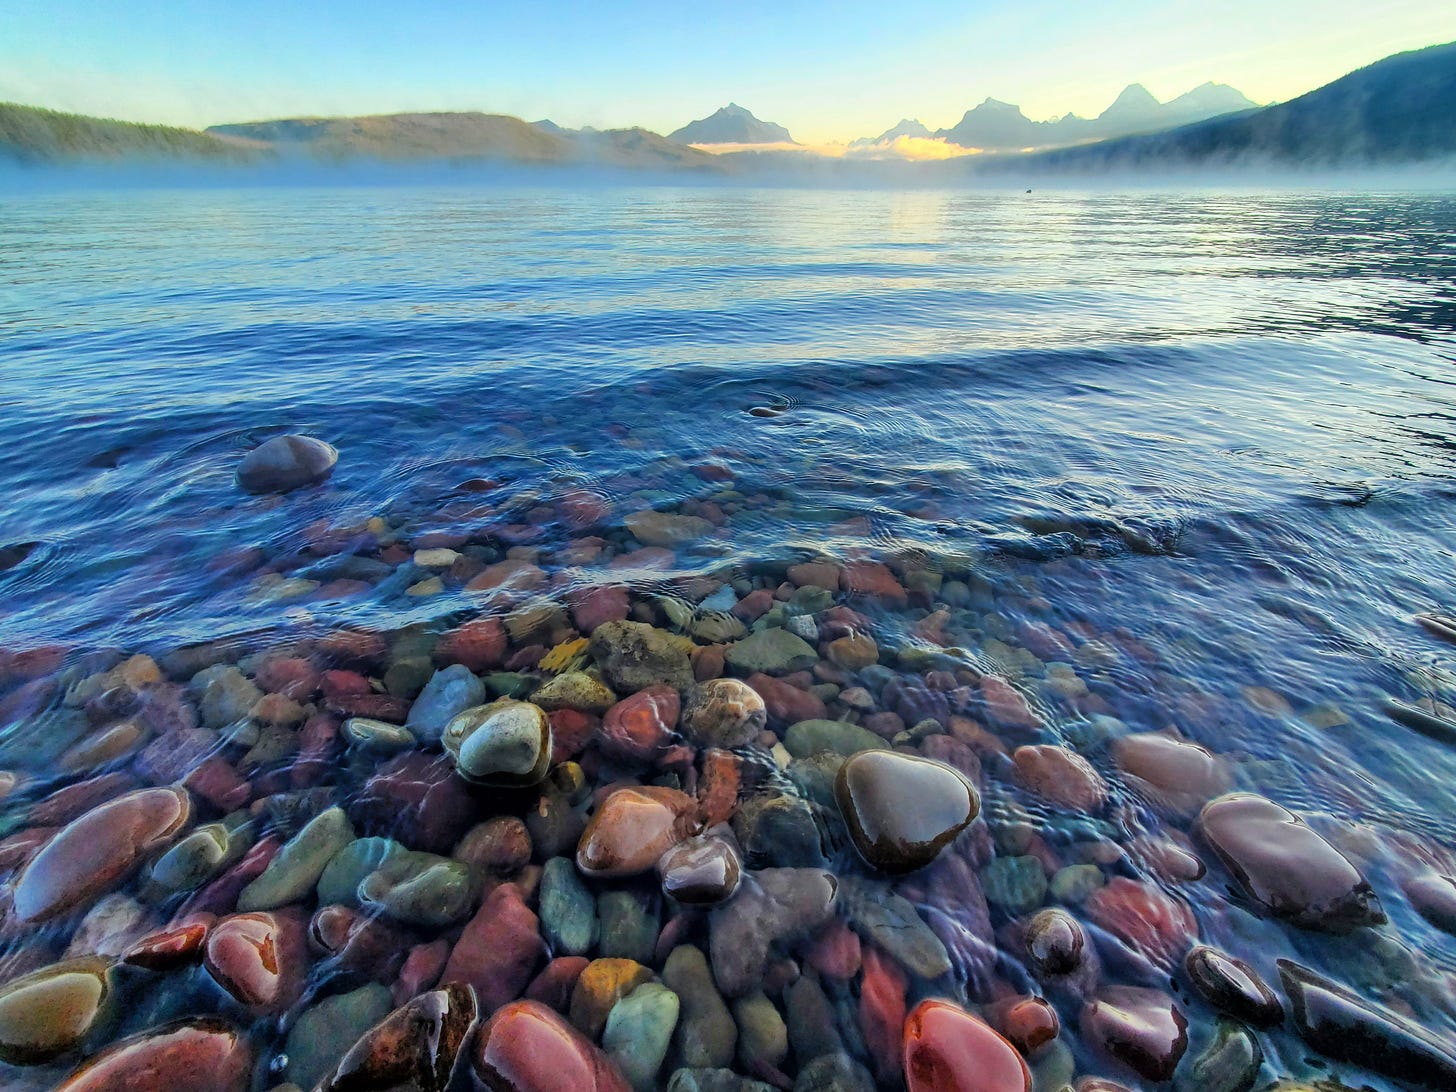 Colorful rocks on a shore, fog, mountains in the background